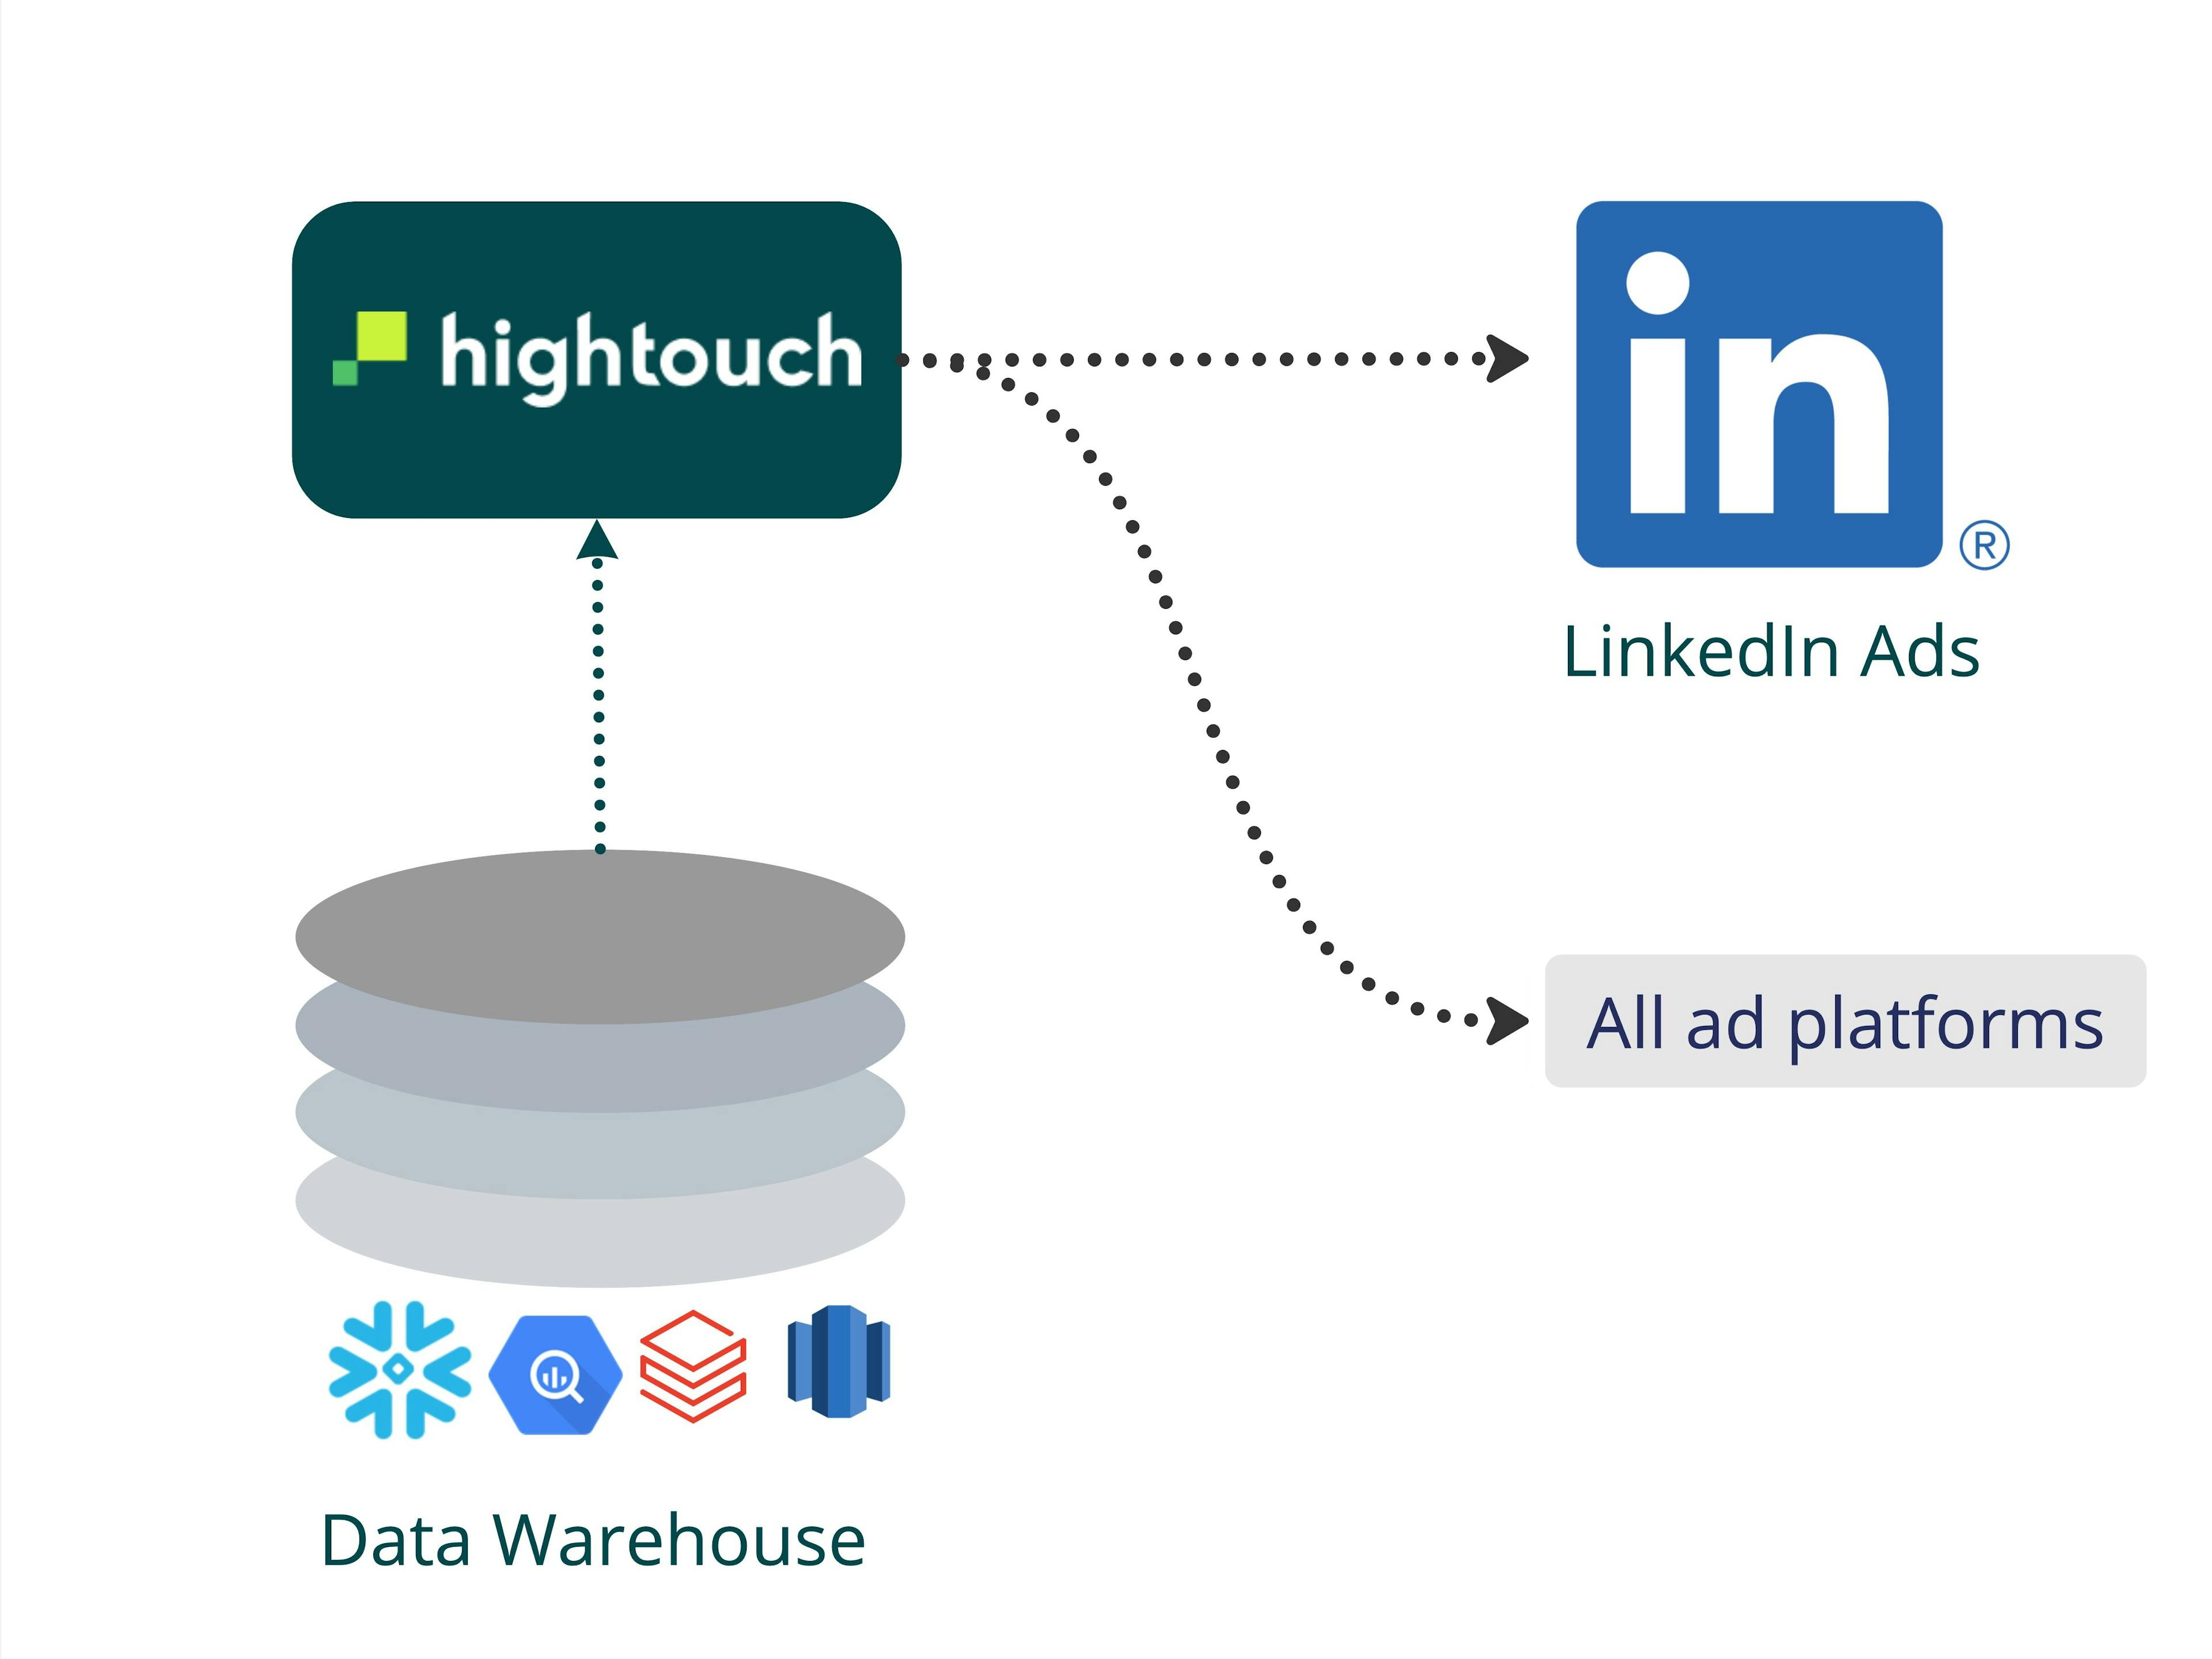 Hightouch syncs data to LinkedIn and other ad platforms